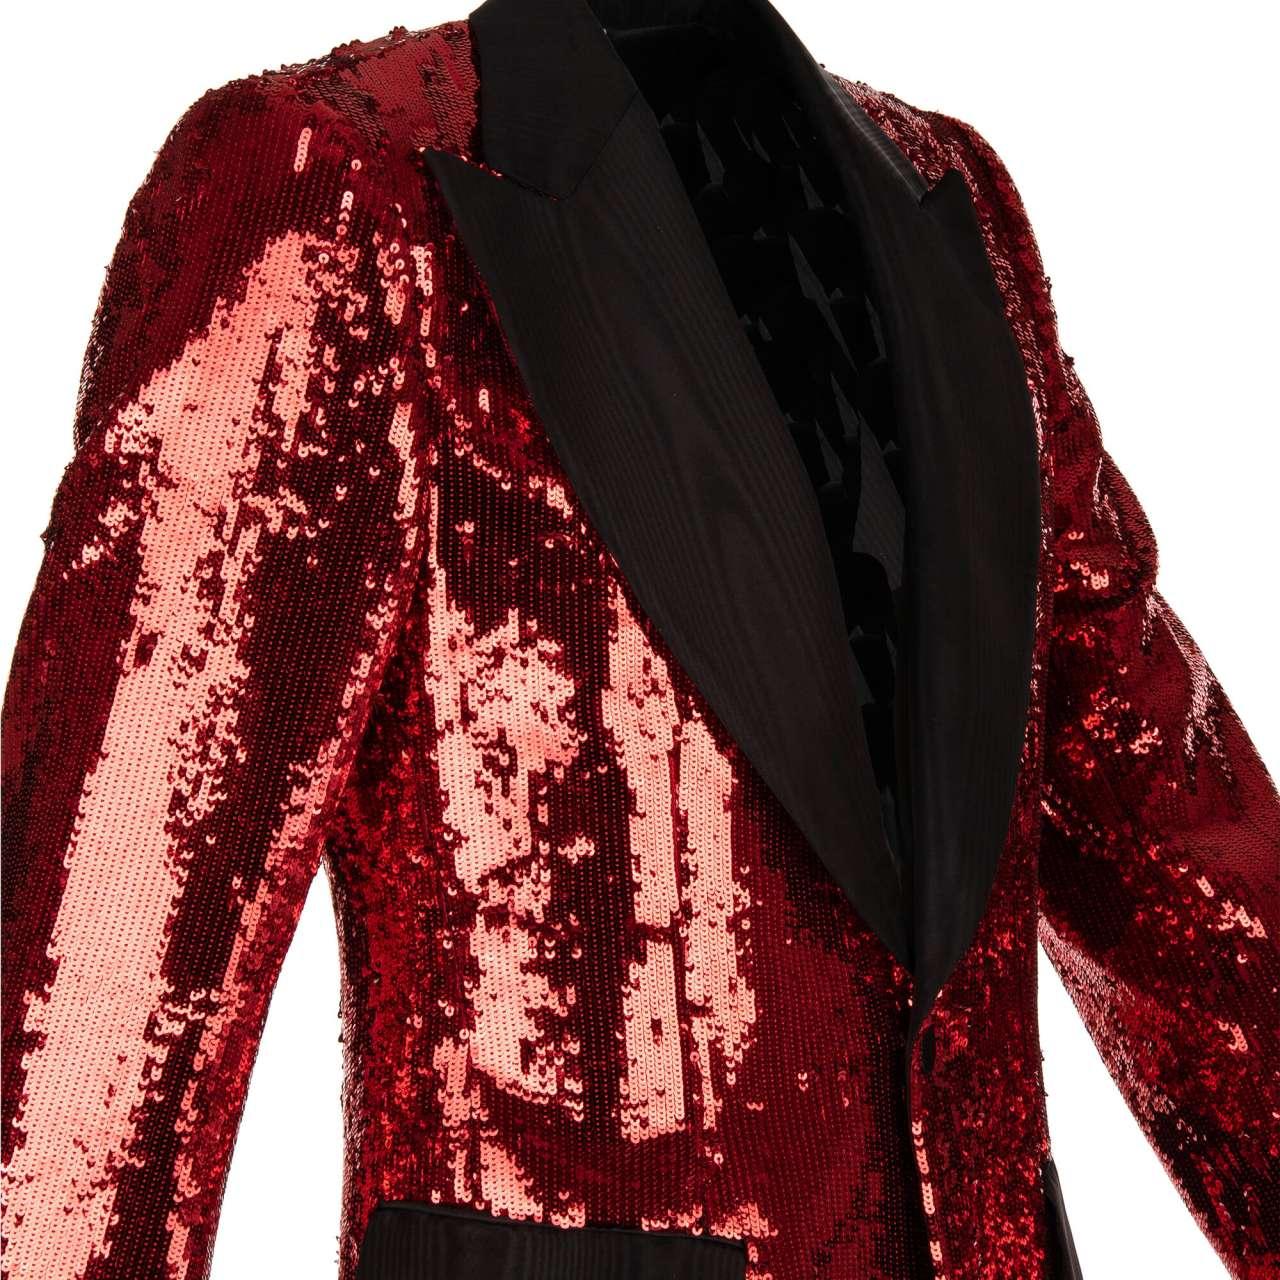 Dolce & Gabbana - Sequined Tuxedo Blazer with Moire Lapel Red Black 48 For Sale 1